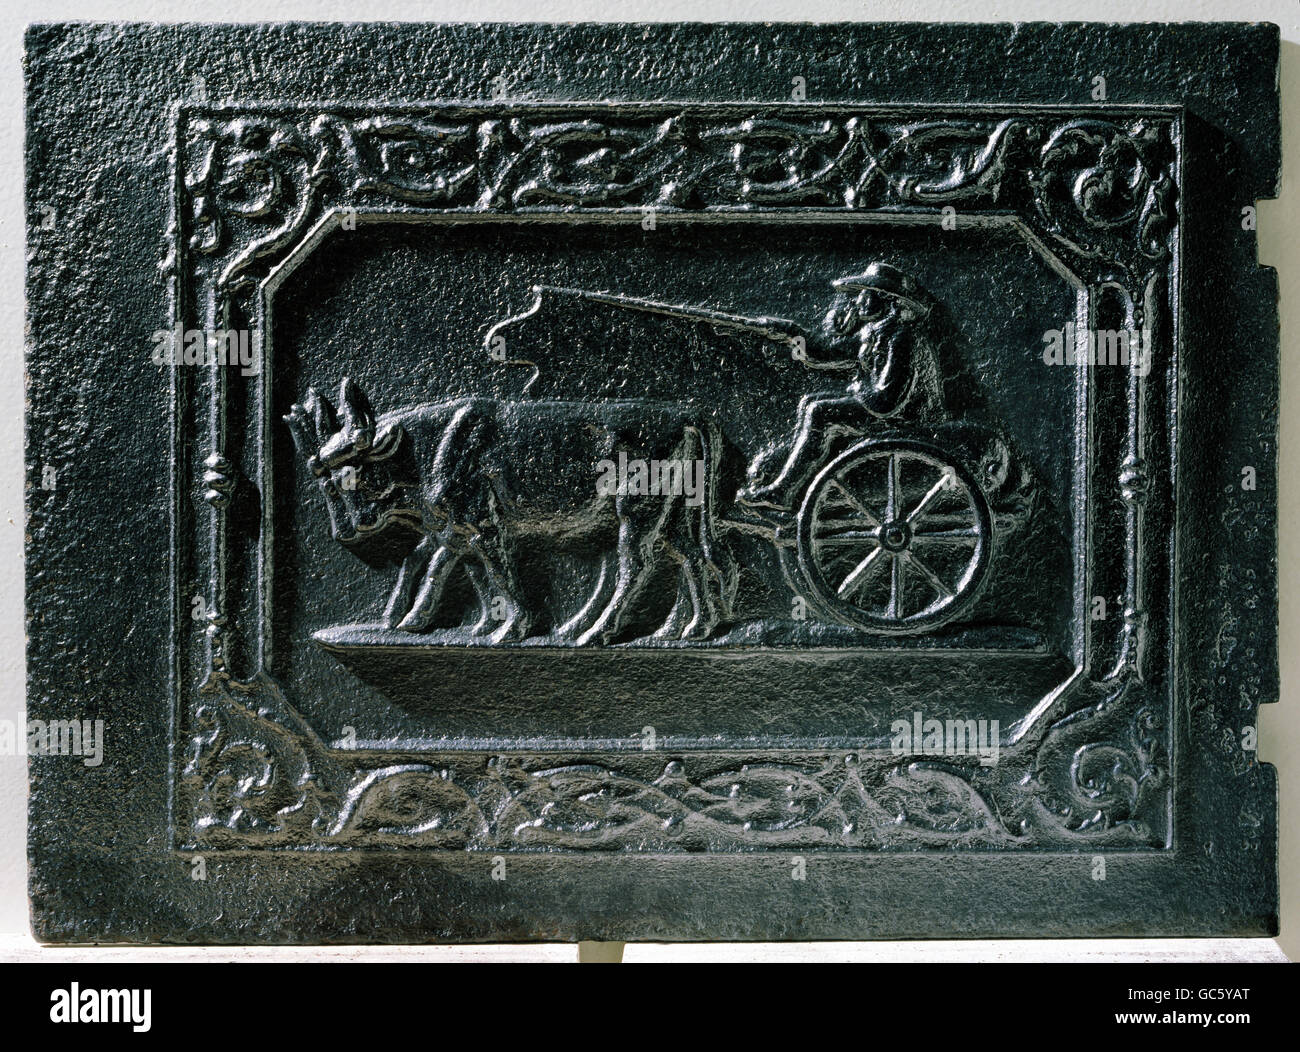 transport / transportation, coach, span of oxen, relief, cast iron, stove plate, circa 18th century, historic, historical, prince-bishop ironworks, Obereichstaett, Bavaria, Germany, arts and craft, handicrafts, metal, metals, iron, animal, animals, ox, oxen, ox cart, oxcart, bullock cart, coach, carriage, coaches, carriages, people, Additional-Rights-Clearences-Not Available Stock Photo